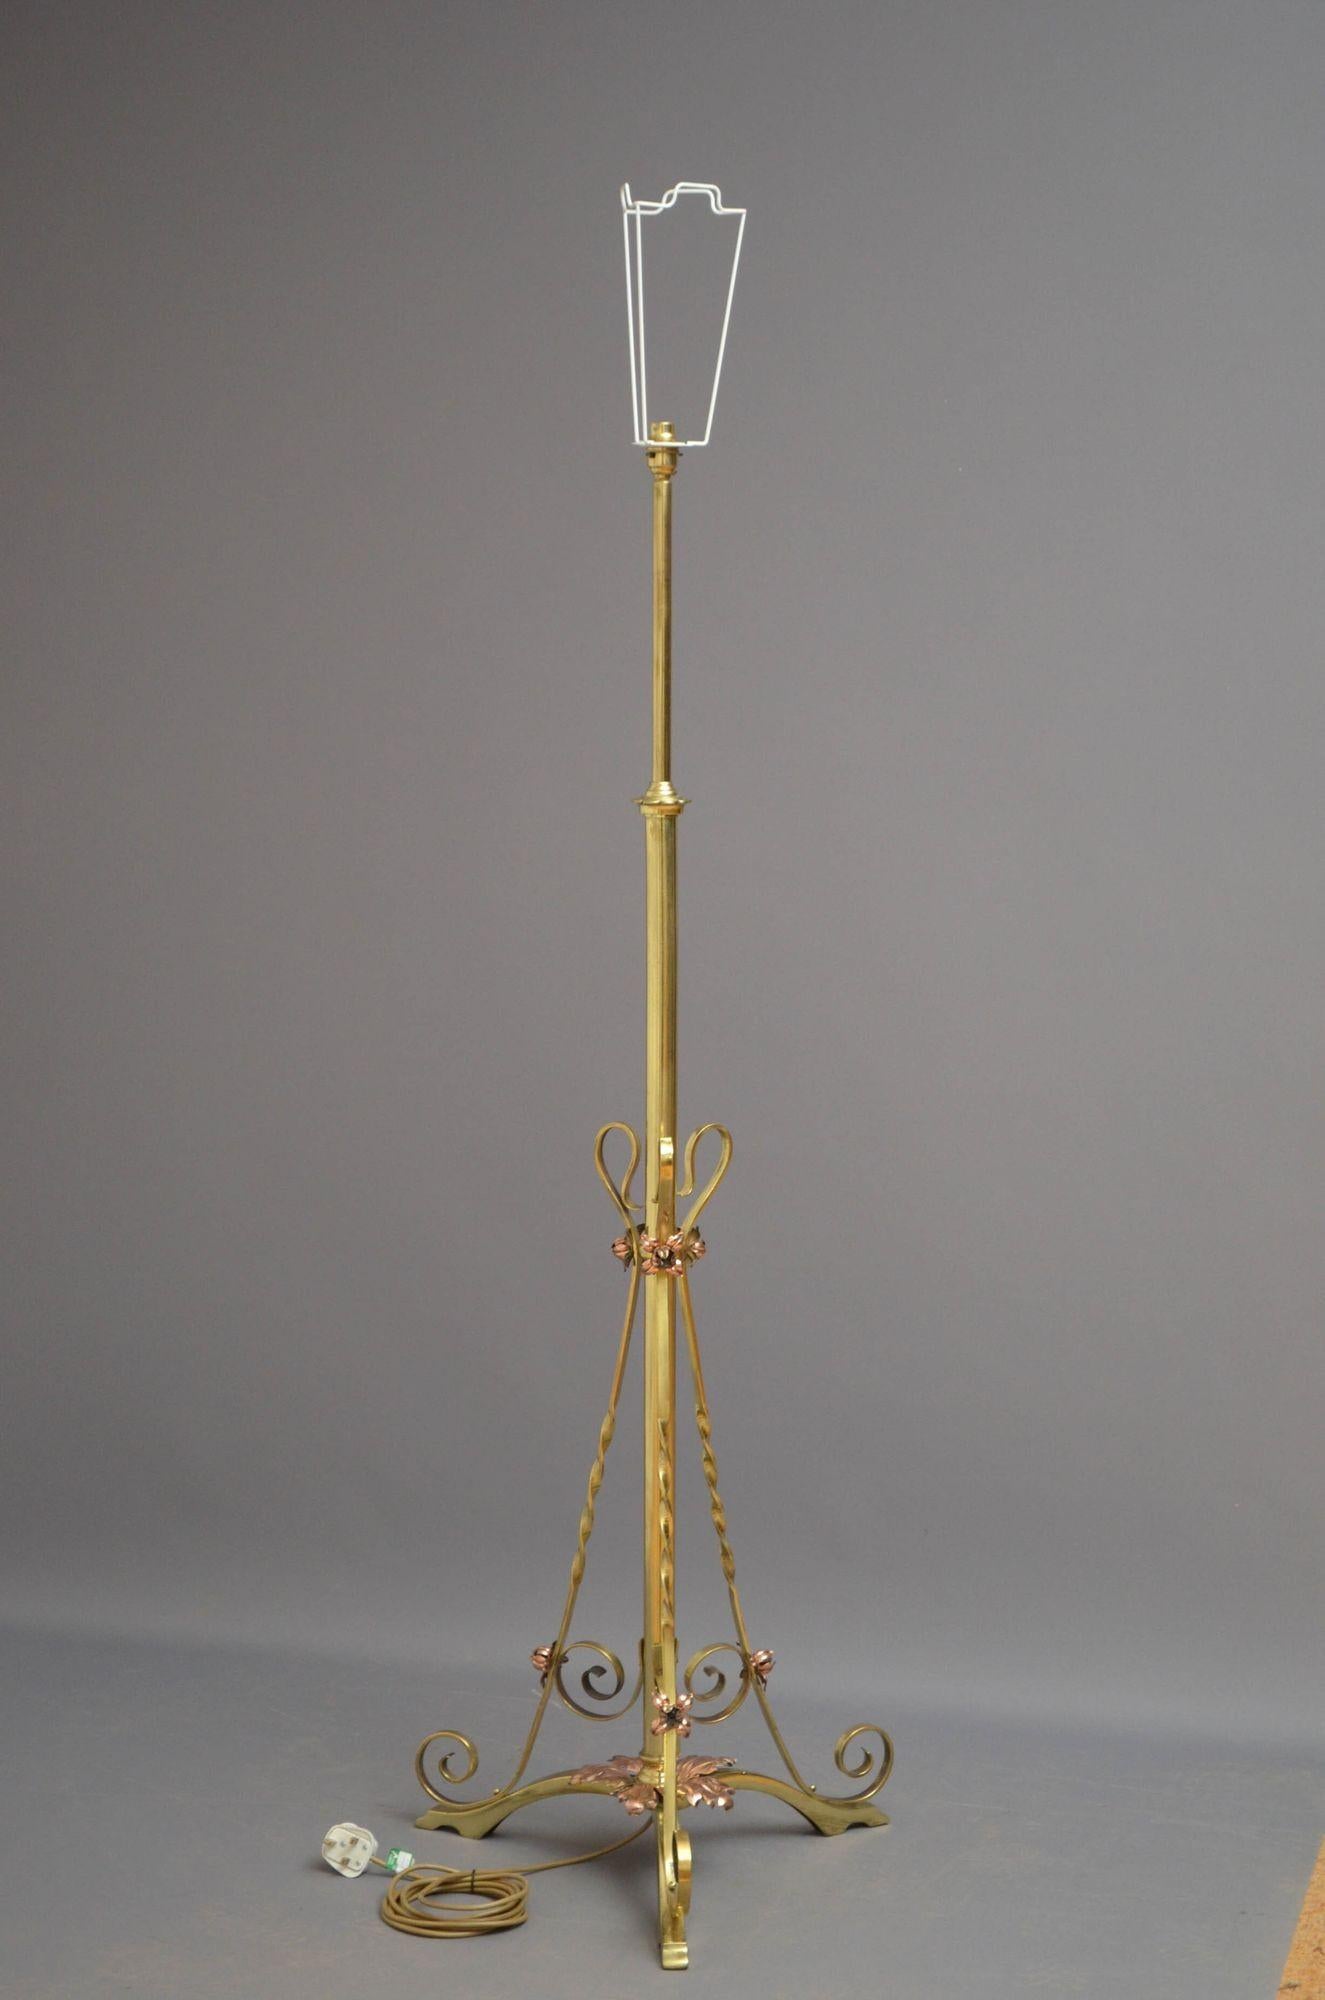 Sn5179 Elegant Art Nouveau brass and copper, height adjustable floor lamp with three twisted supports and scrolls and three legs, decorated with copper leaf motifs. This antique lamp has been PAT tested and is in home ready condition. c1900
H49-66